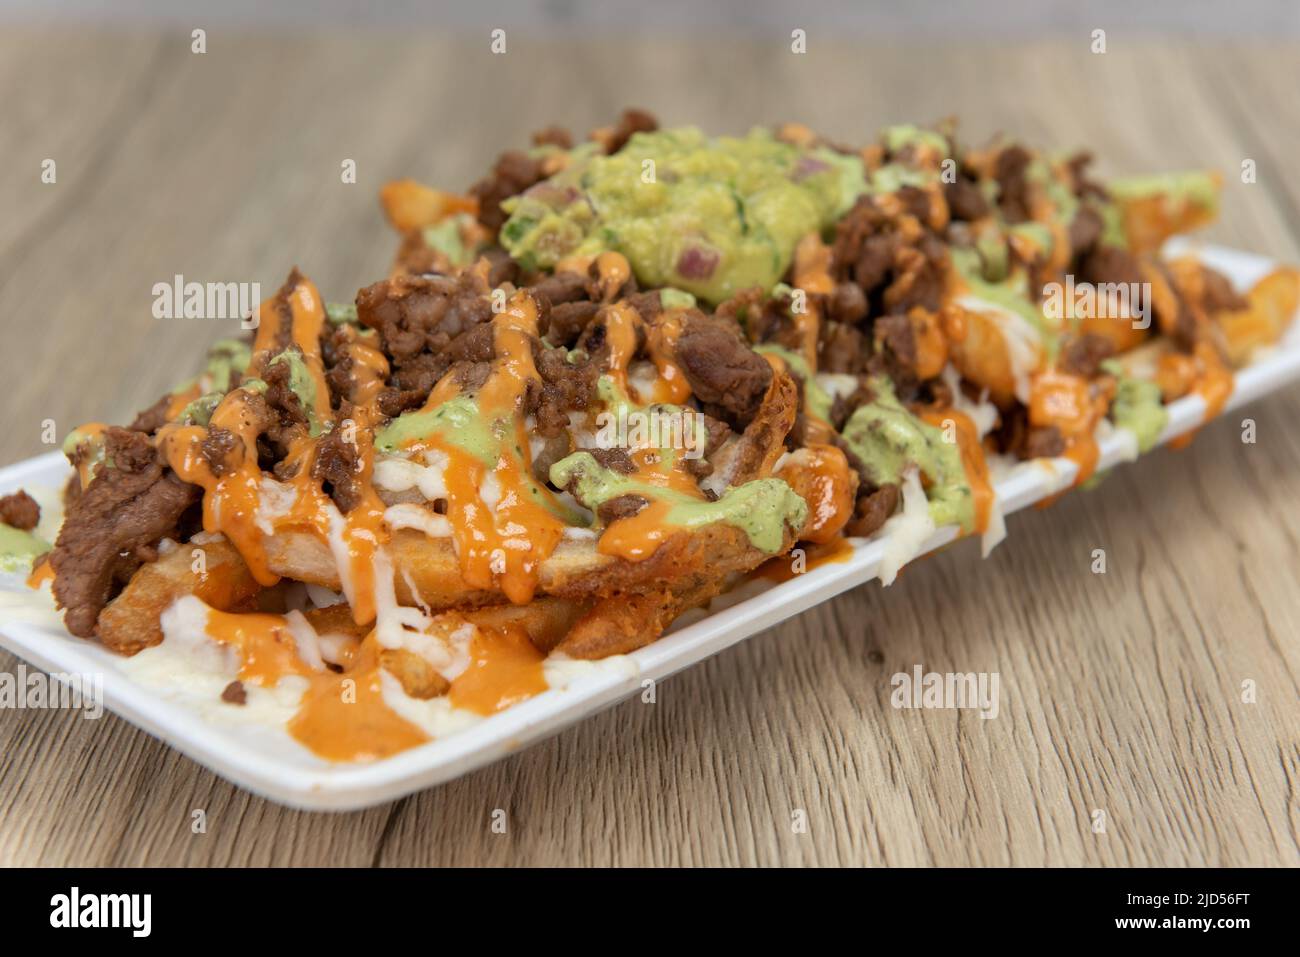 Appetizing carne asada steak french fries for a tempting Mexican food delicacy. Stock Photo